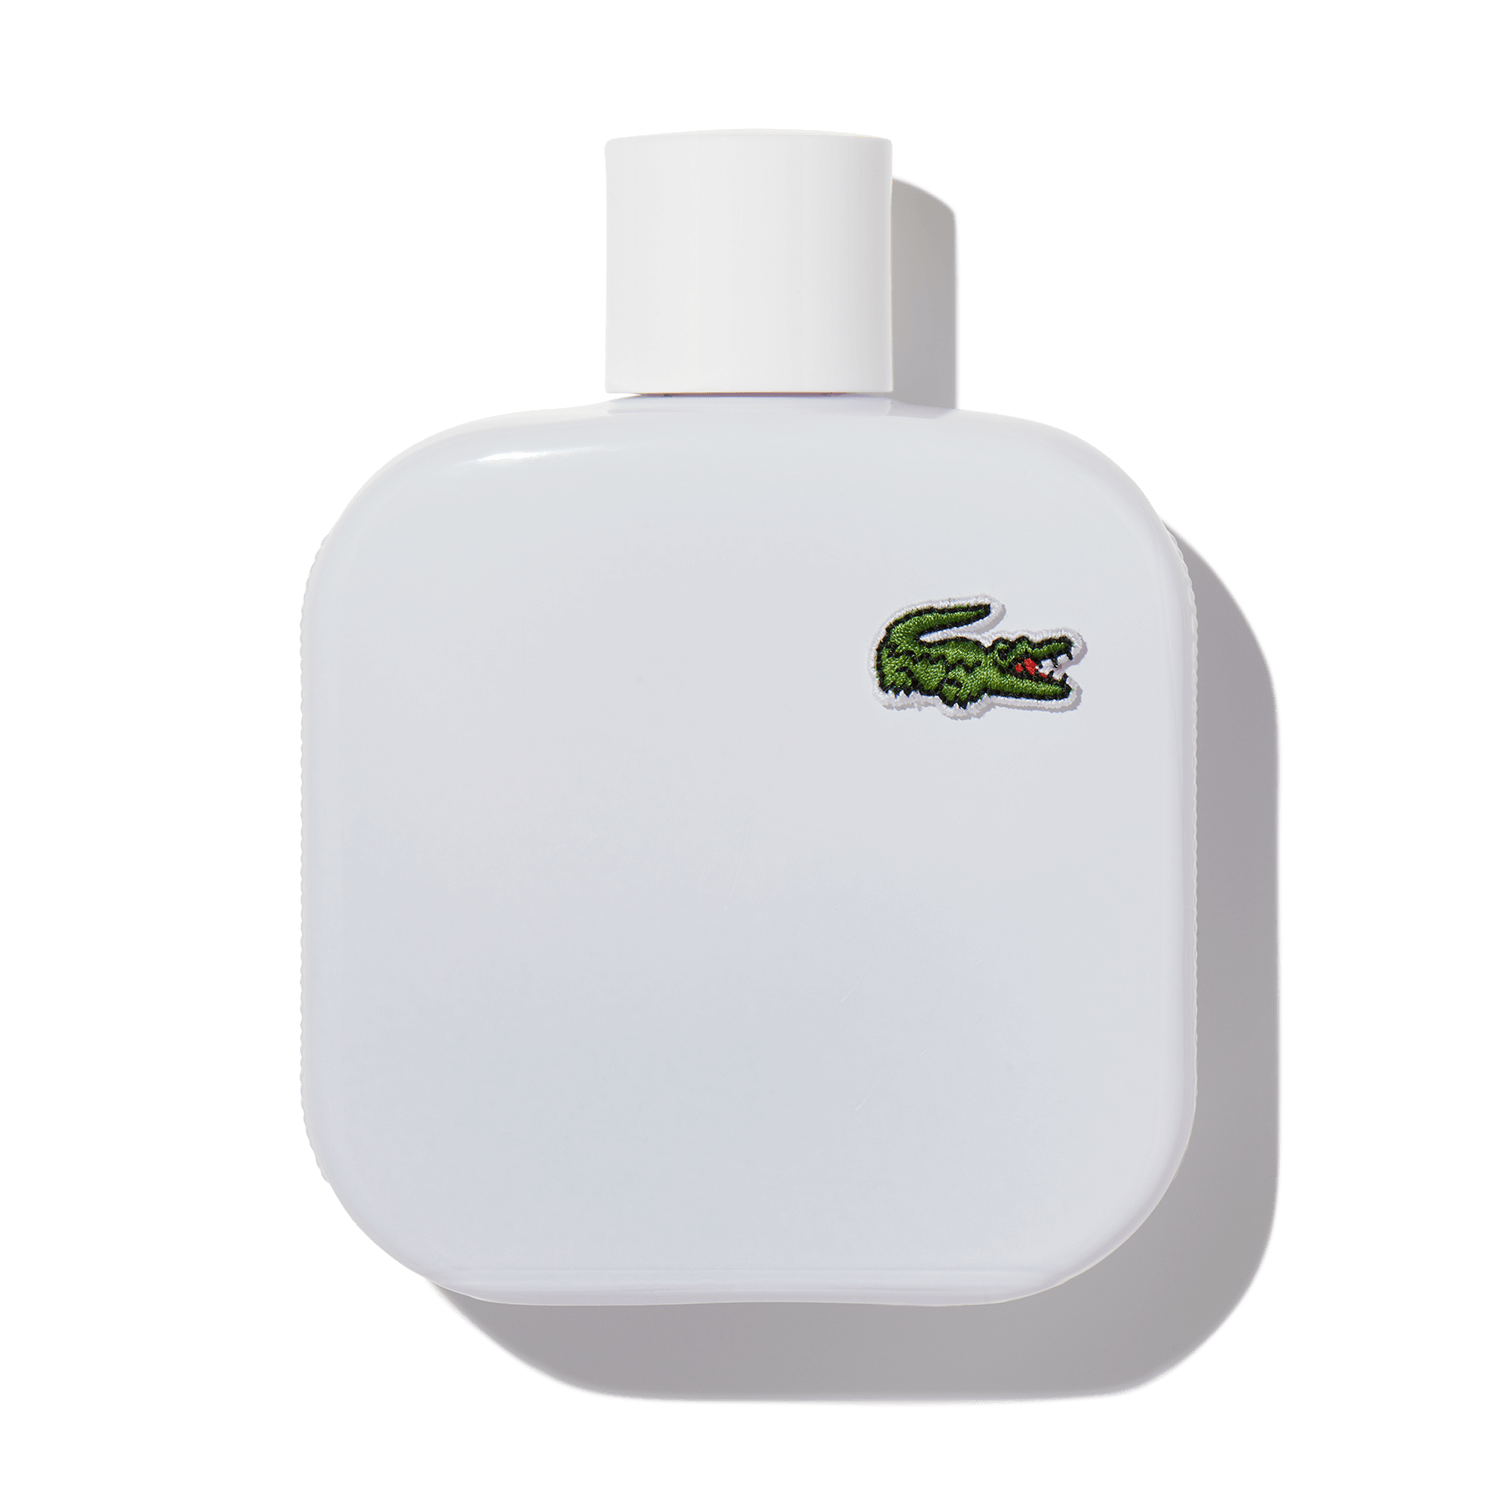 Lacoste L.12.12 White EDT by Lacoste $16.95/month | Scentbird